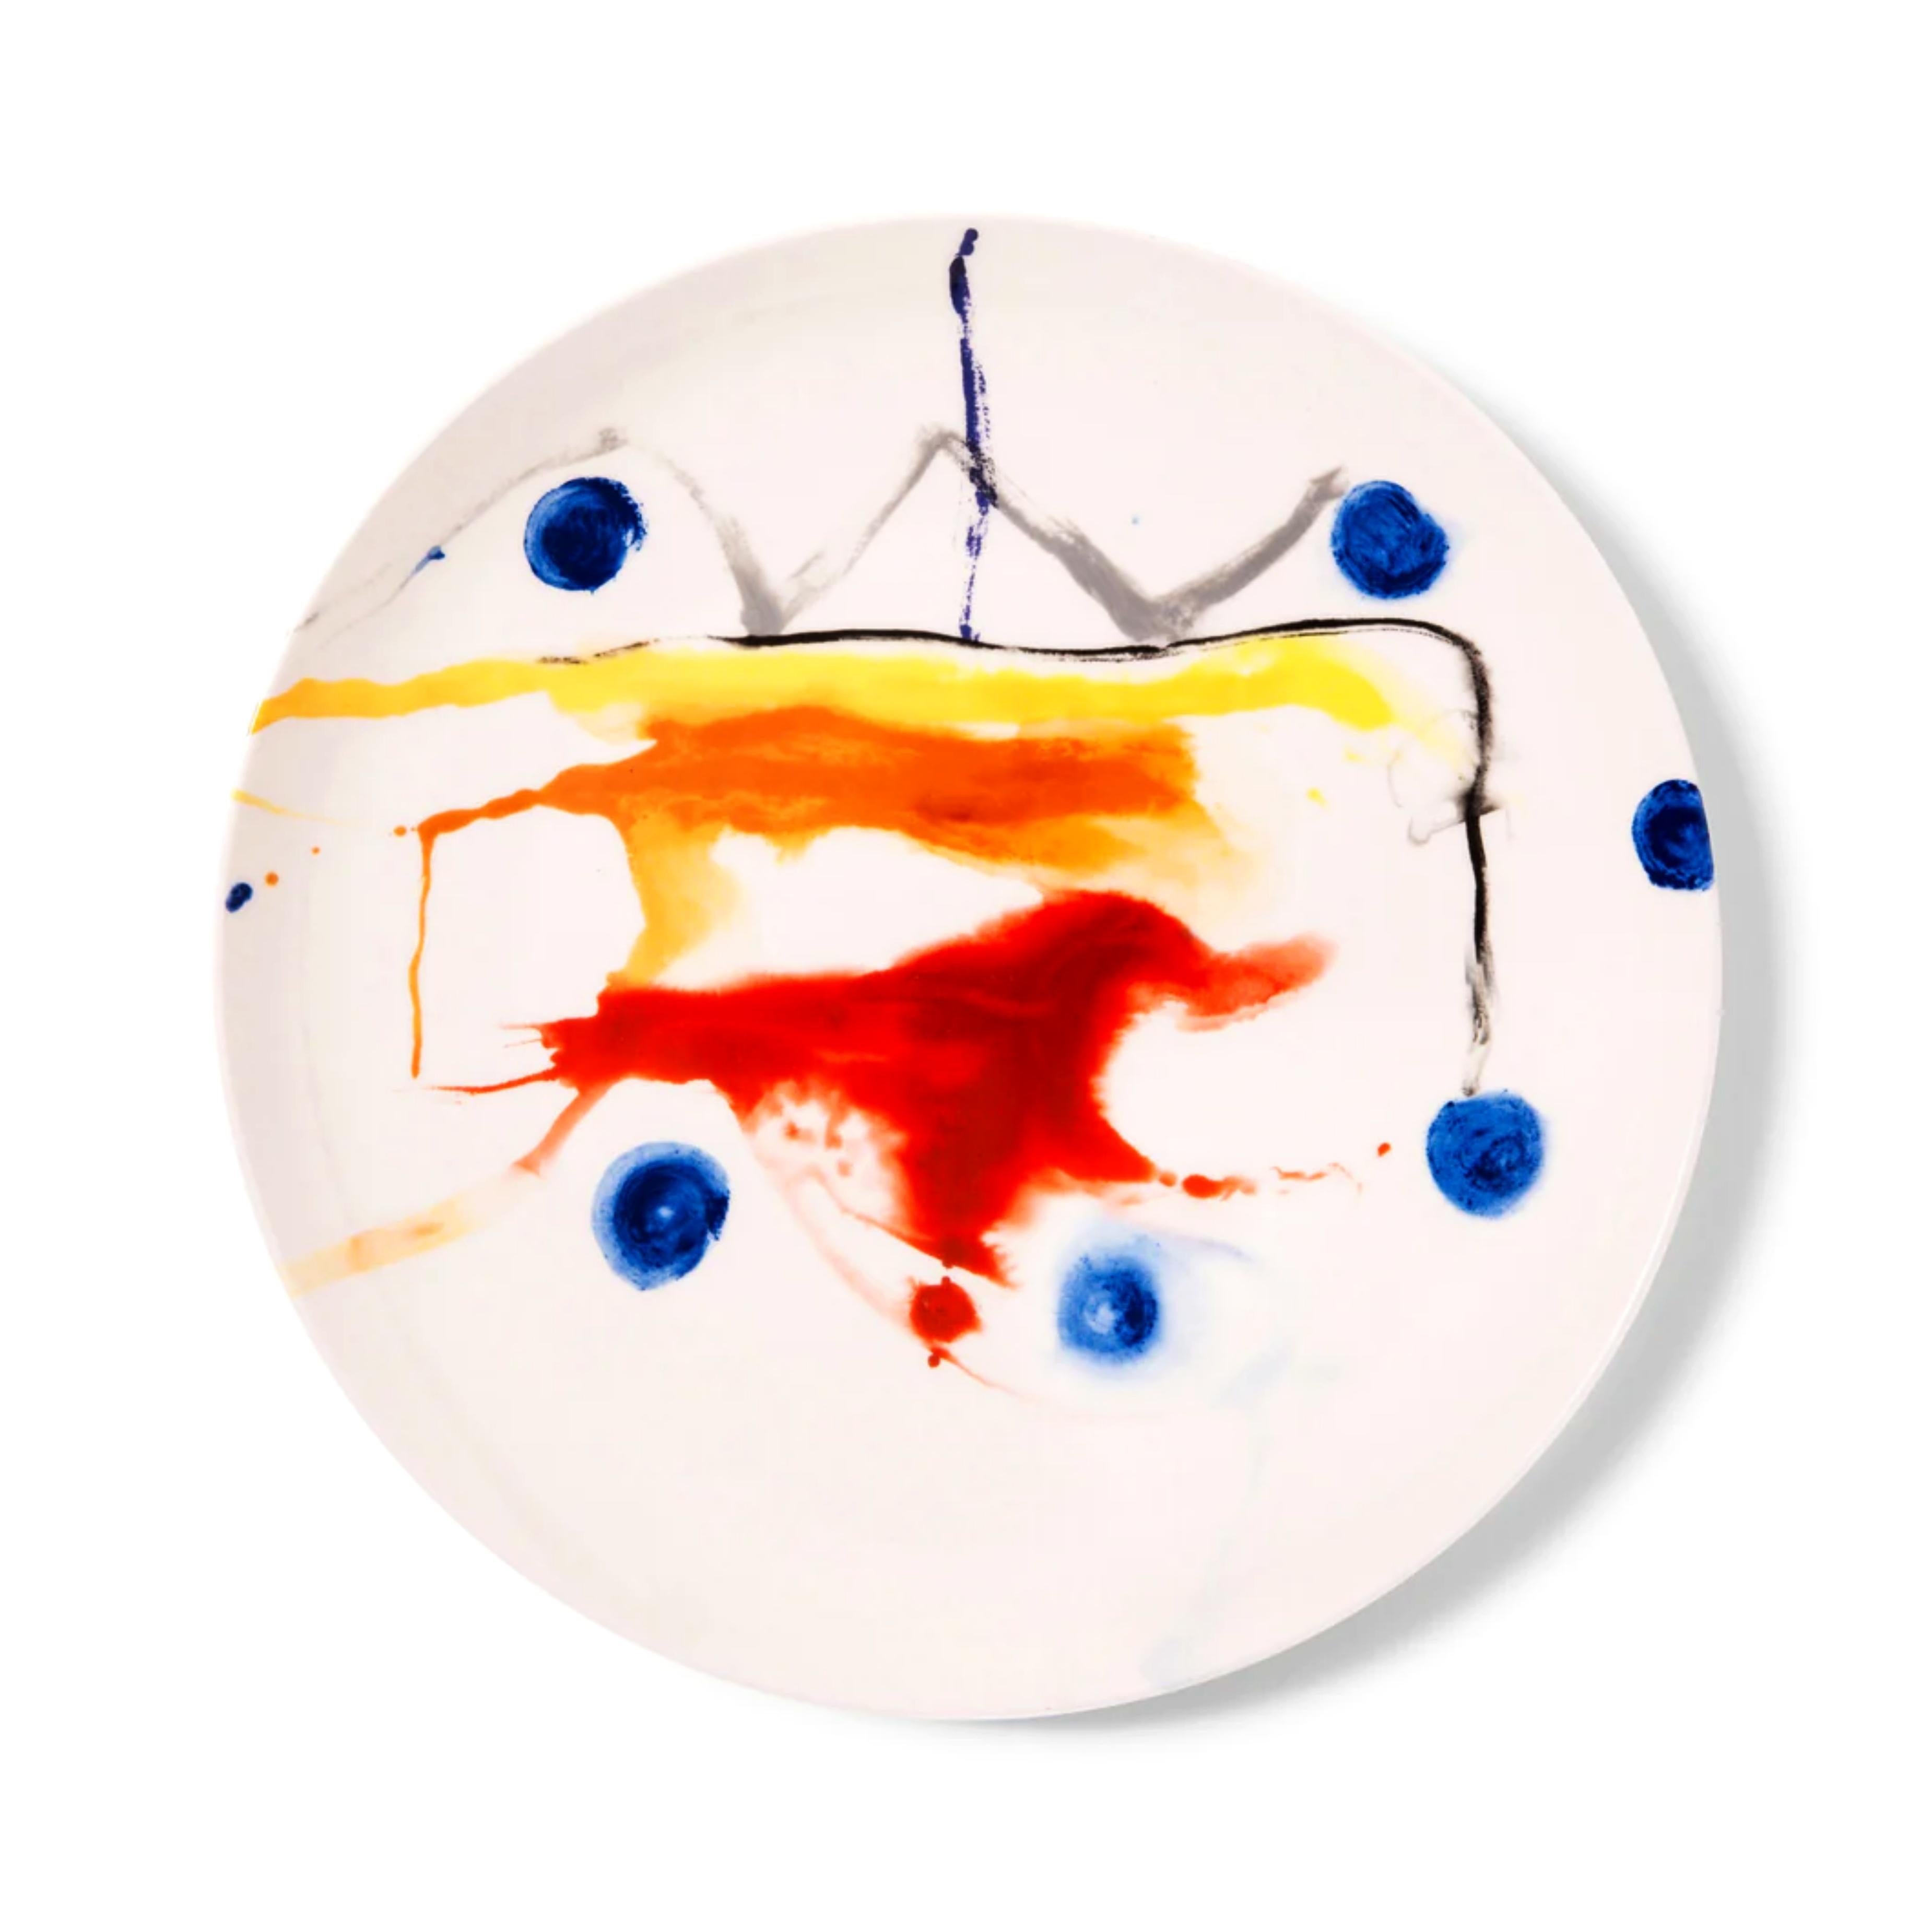 Acrobat (detail), Limited Edition Porcelain Plate in bespoke blue box - Abstract - Abstract Expressionist Print by Helen Frankenthaler